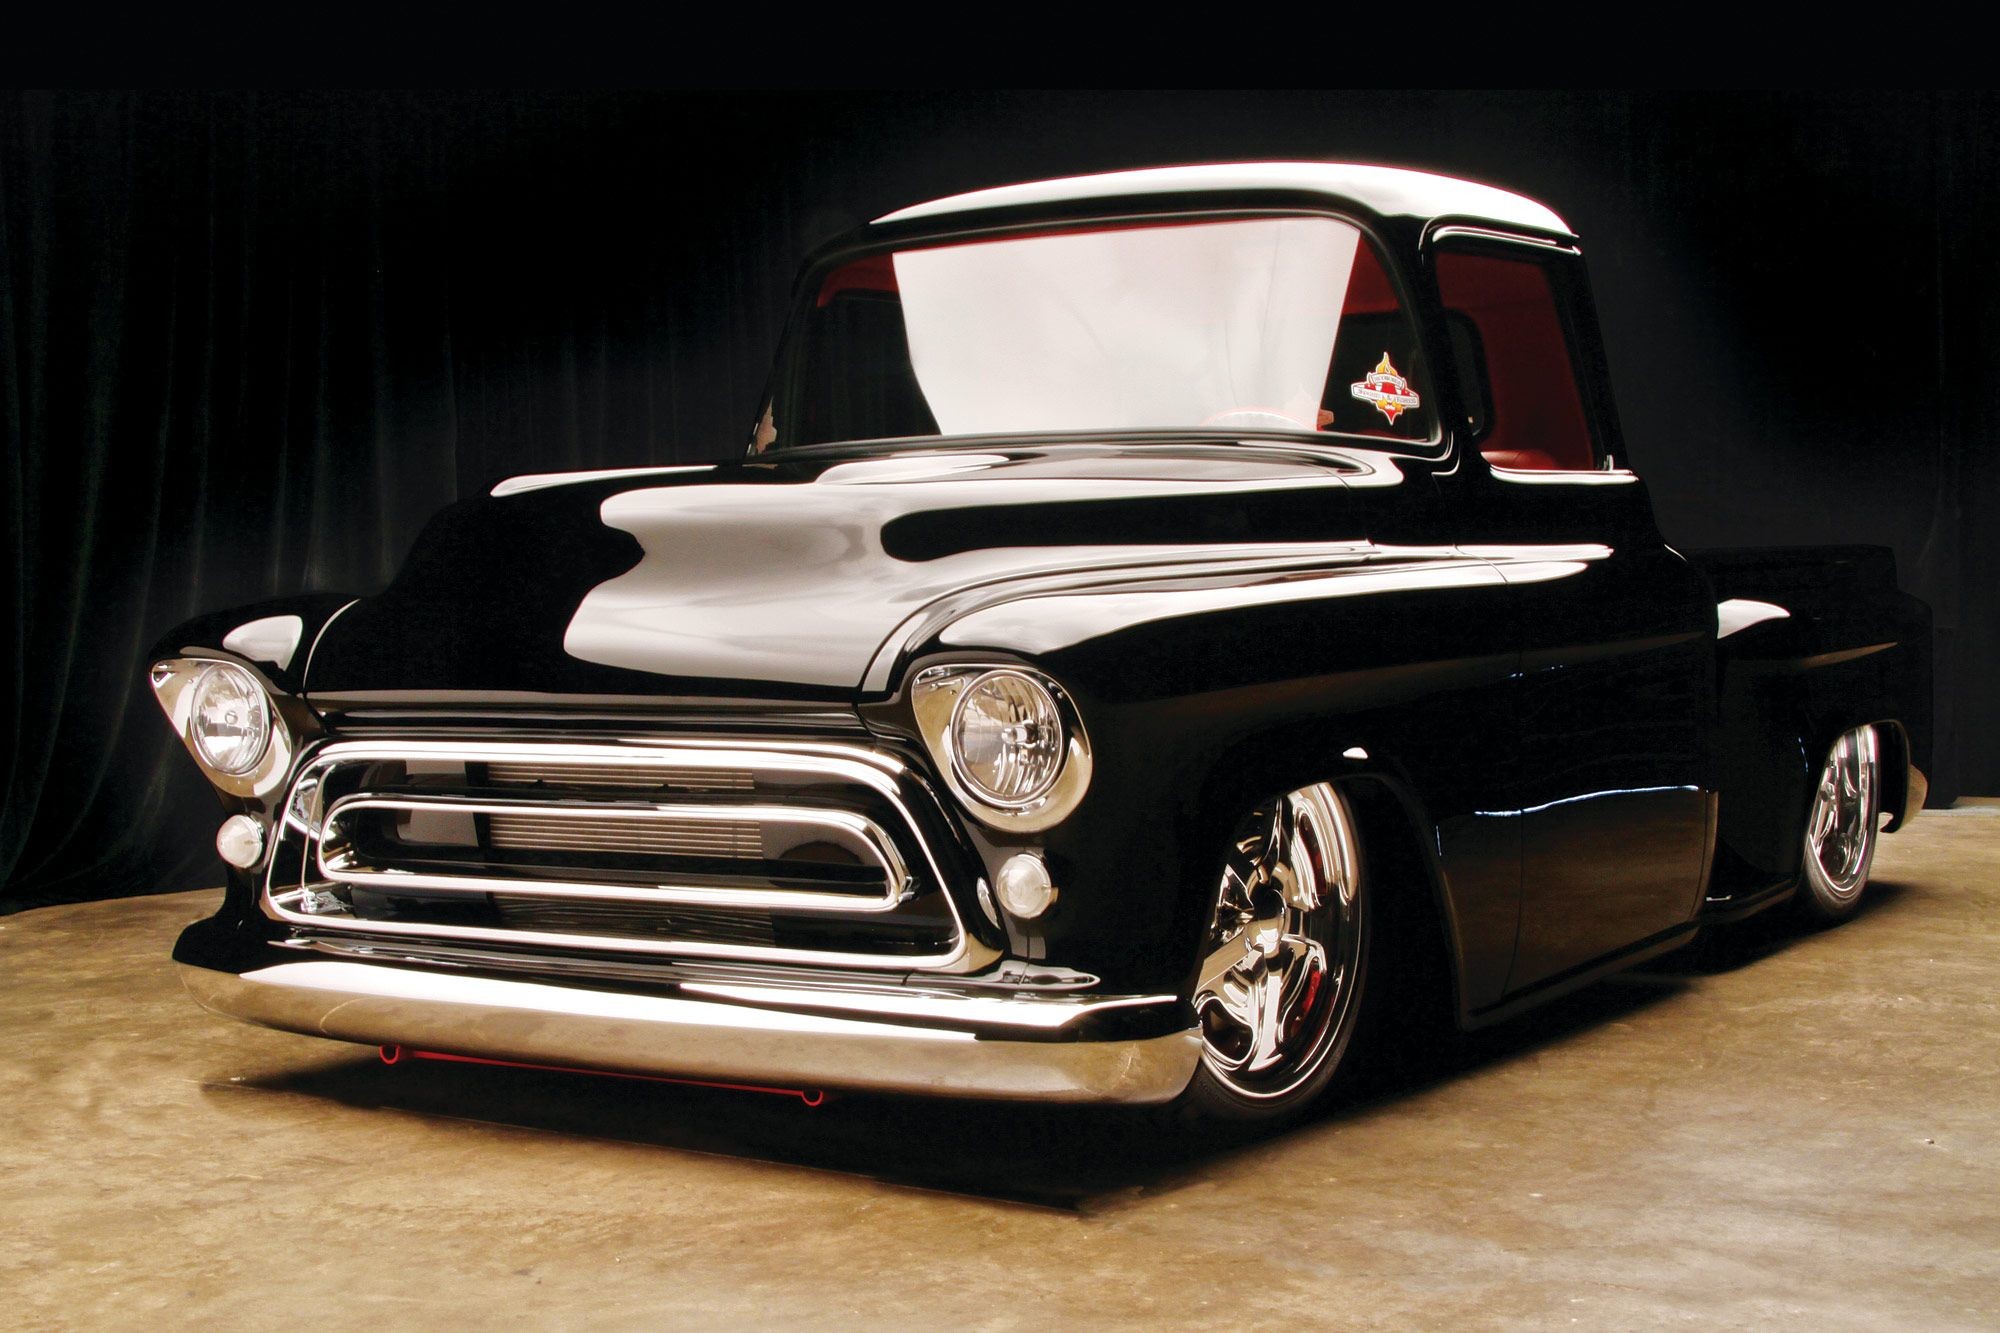 Filename: Images-HD-Chevy-Wallpapers.jpg